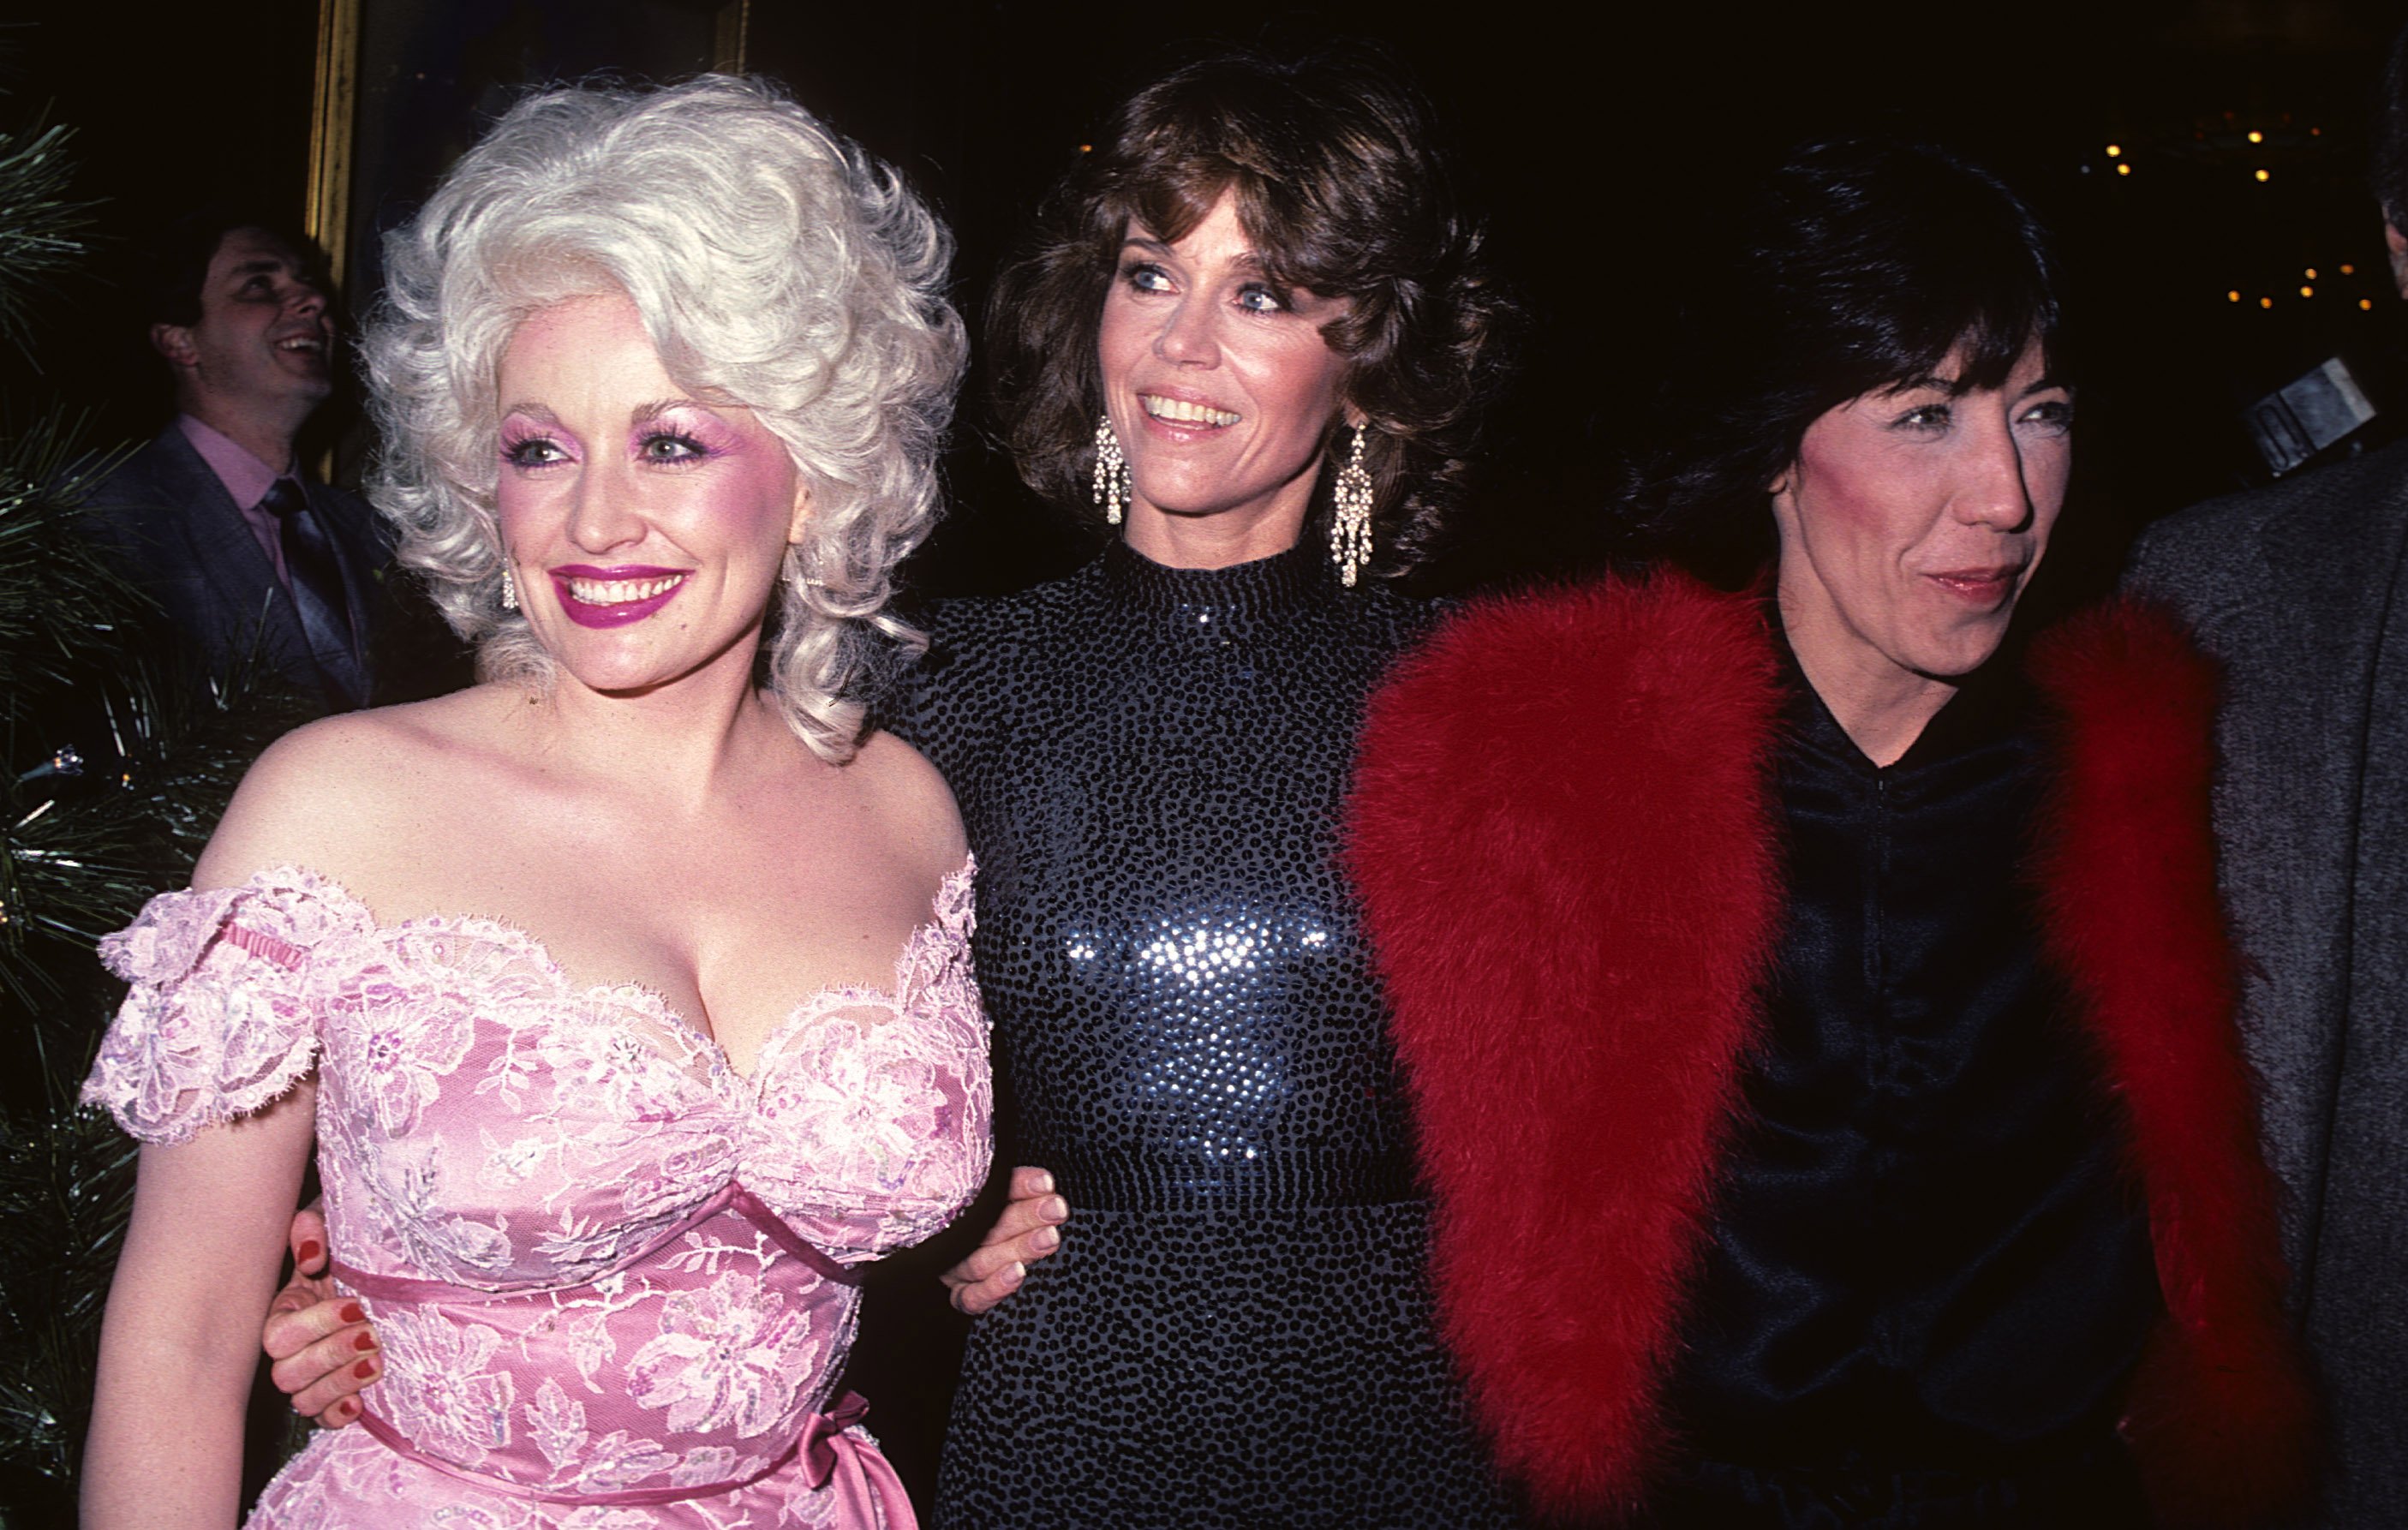 Dolly Parton, Jane Fonda, and Lily Tomlin near other people